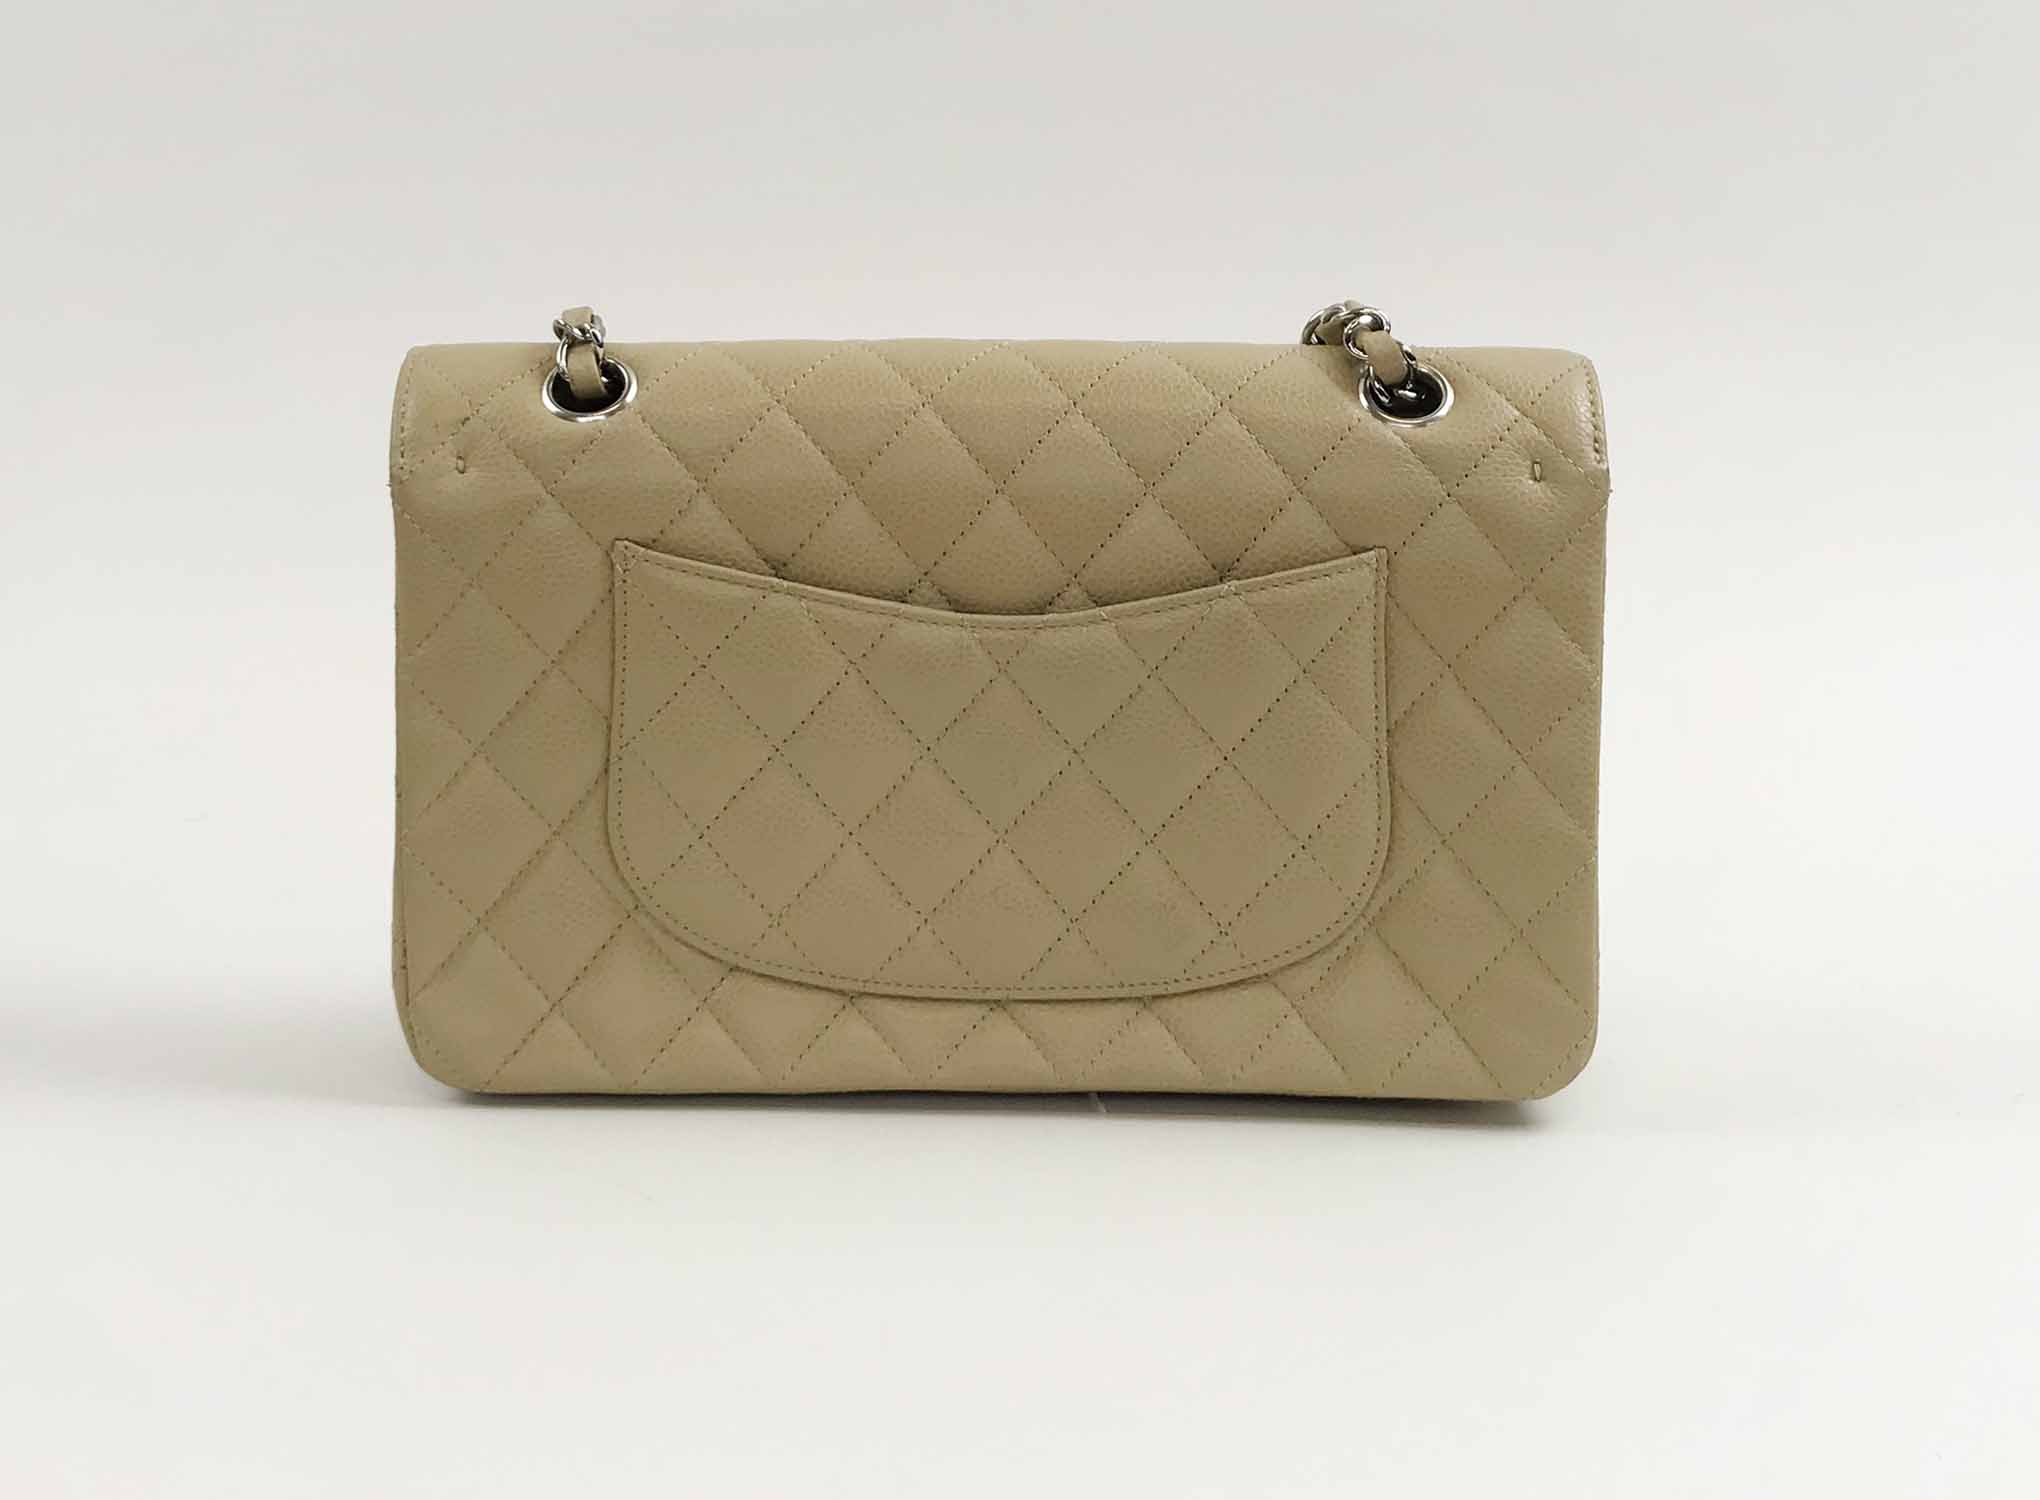 CHANEL CLASSIC FLAP BAG, with front double flap closure, iconic quilted  pattern and silver hardware, chain and leather shoulder strap, matching  leather interior, interlocked C lock, 25cm x 7cm x 15cm H